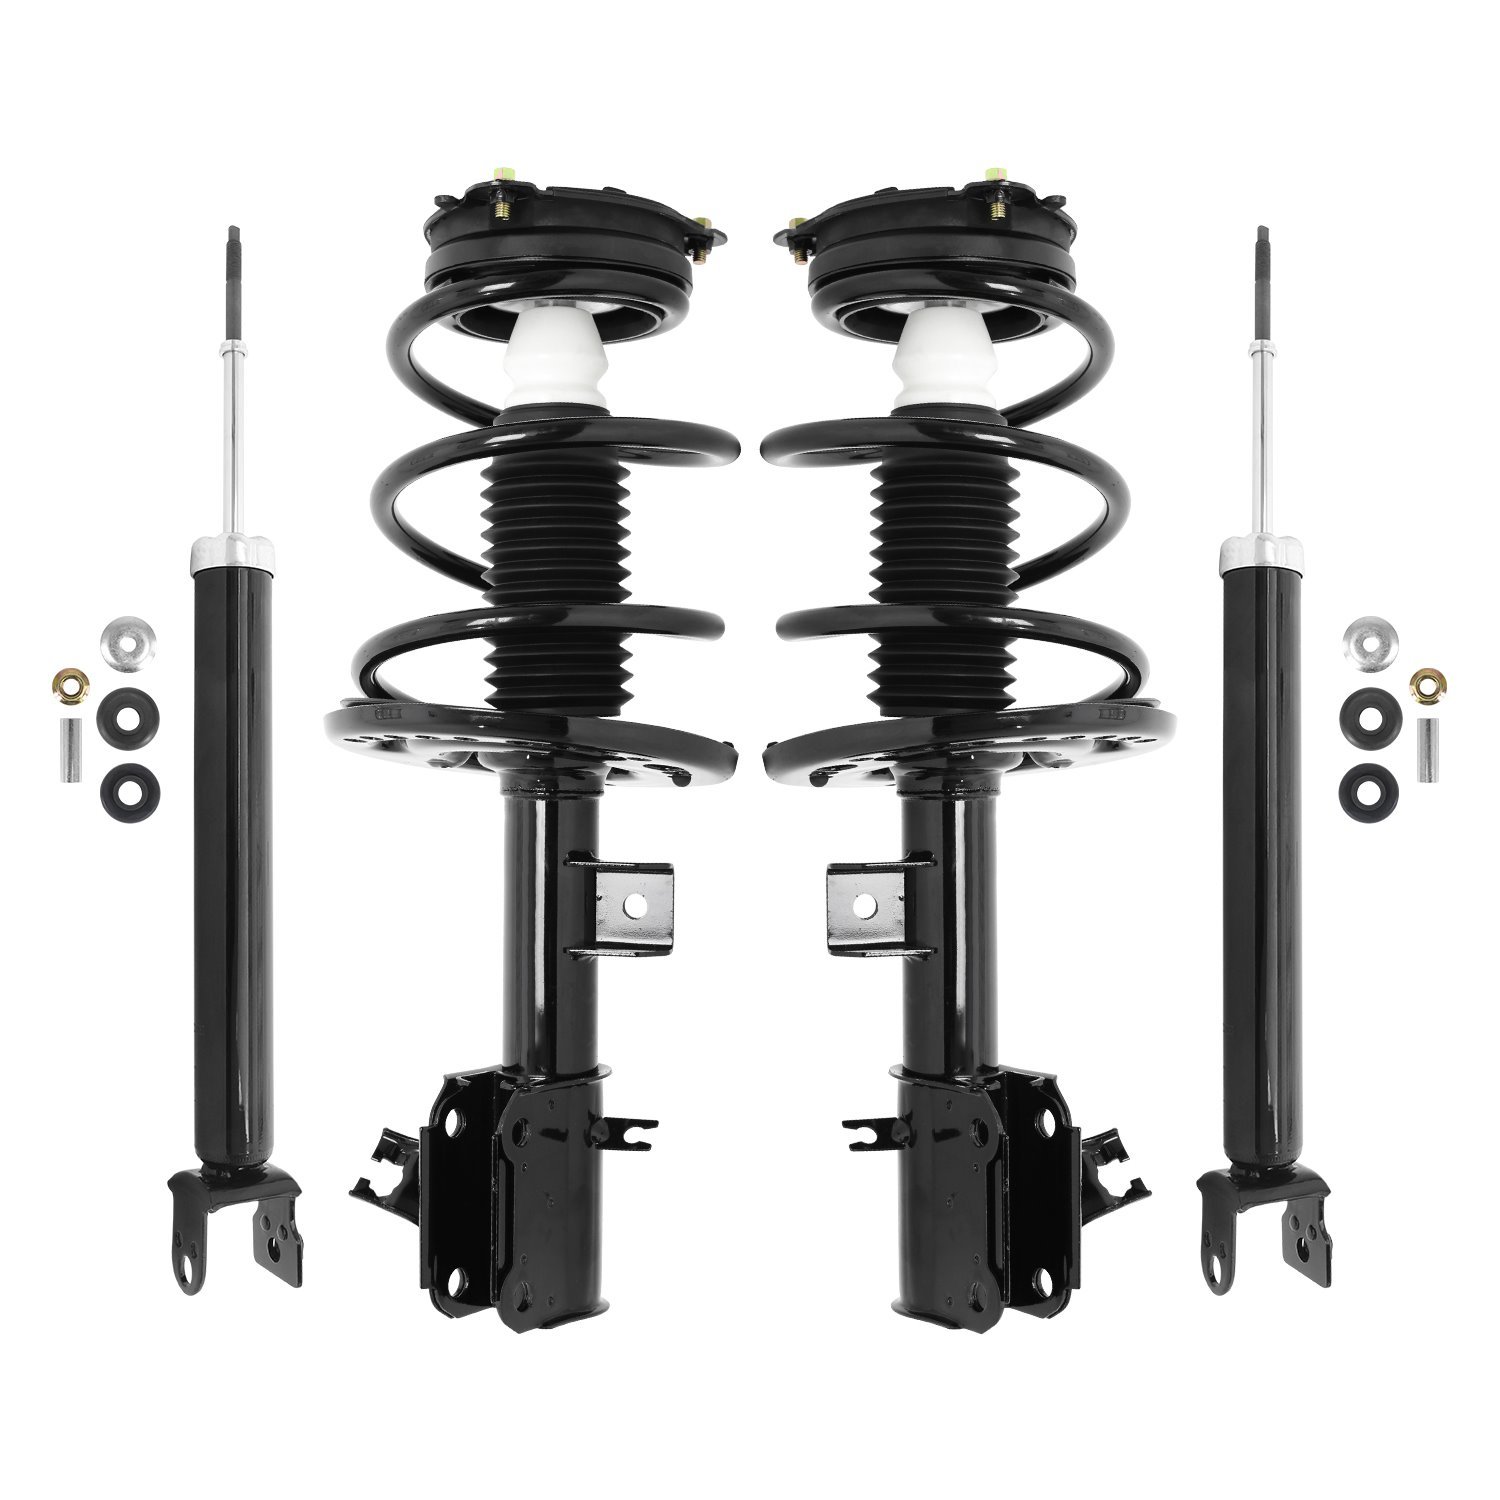 4-11633-255030-001 Front & Rear Suspension Strut & Coil Spring Assembly Fits Select Nissan Altima